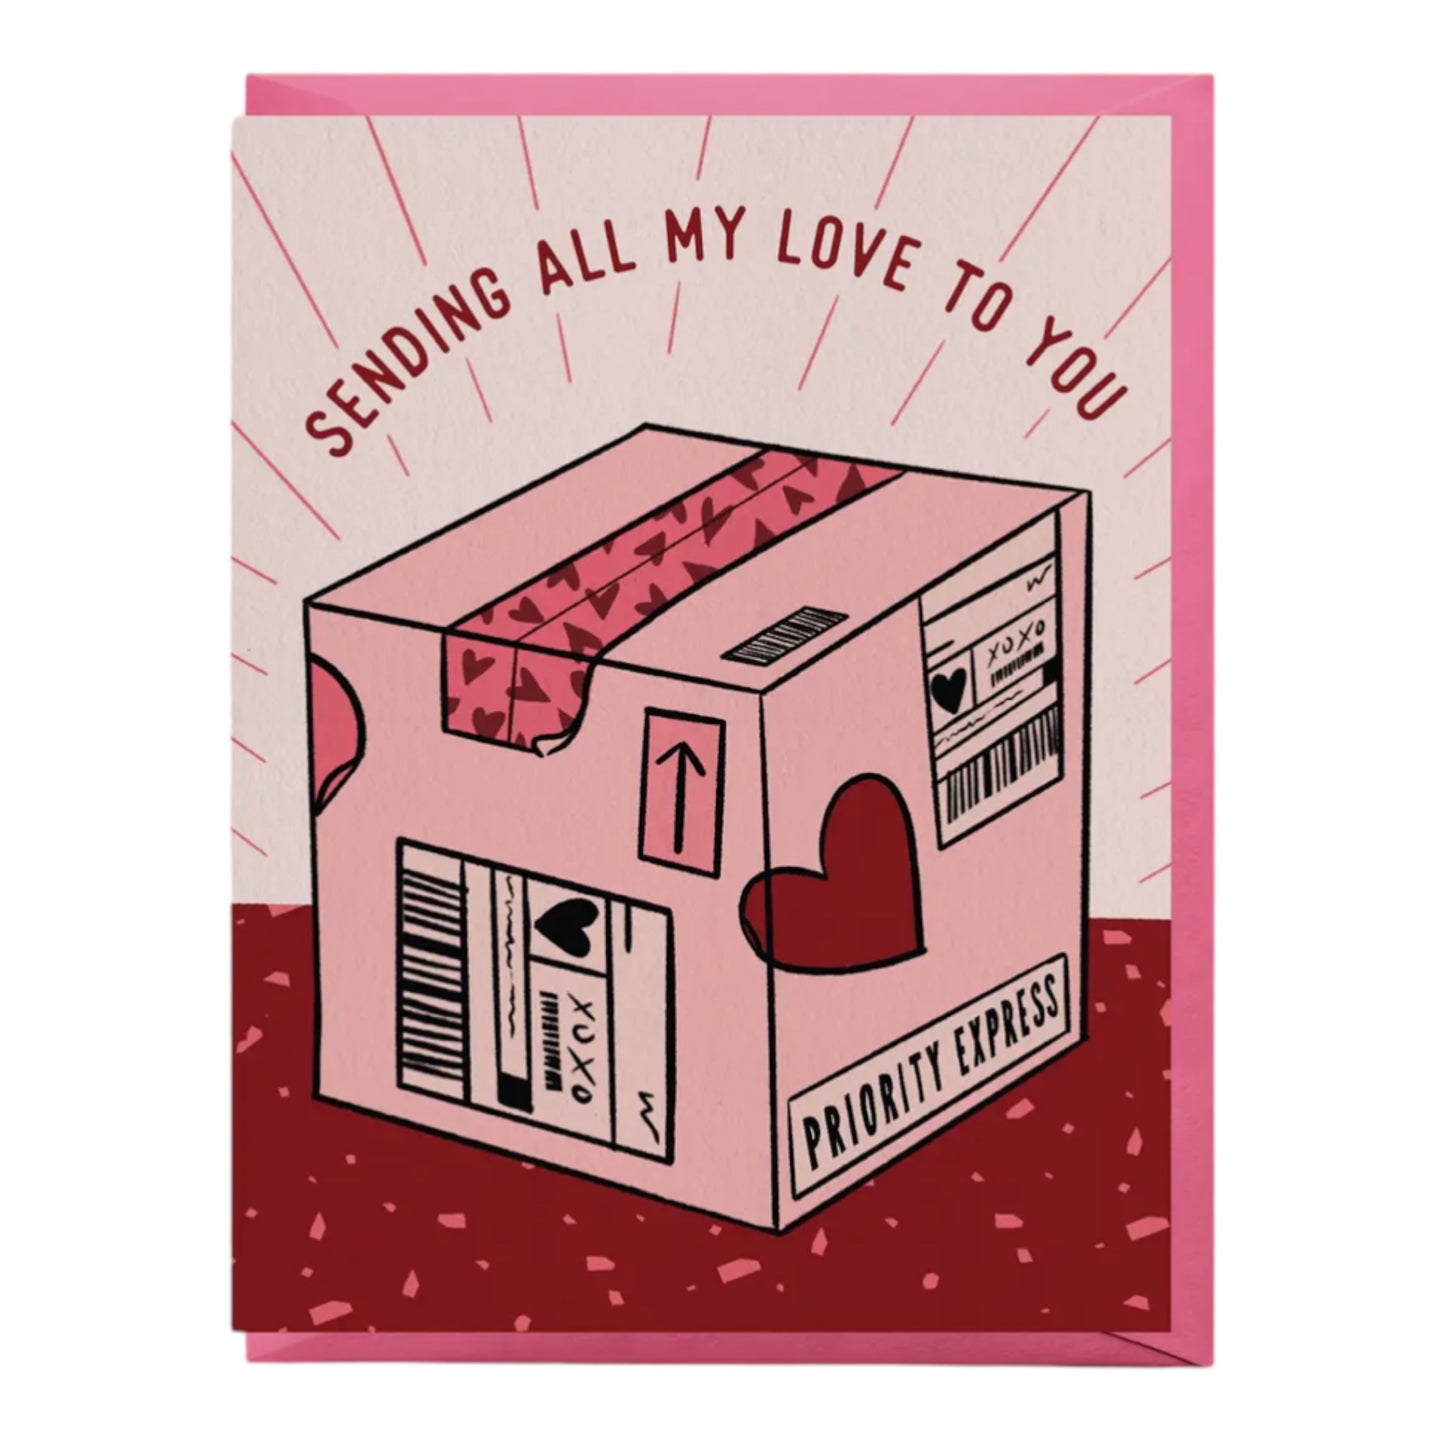 Sending All My Love to You Greeting Card